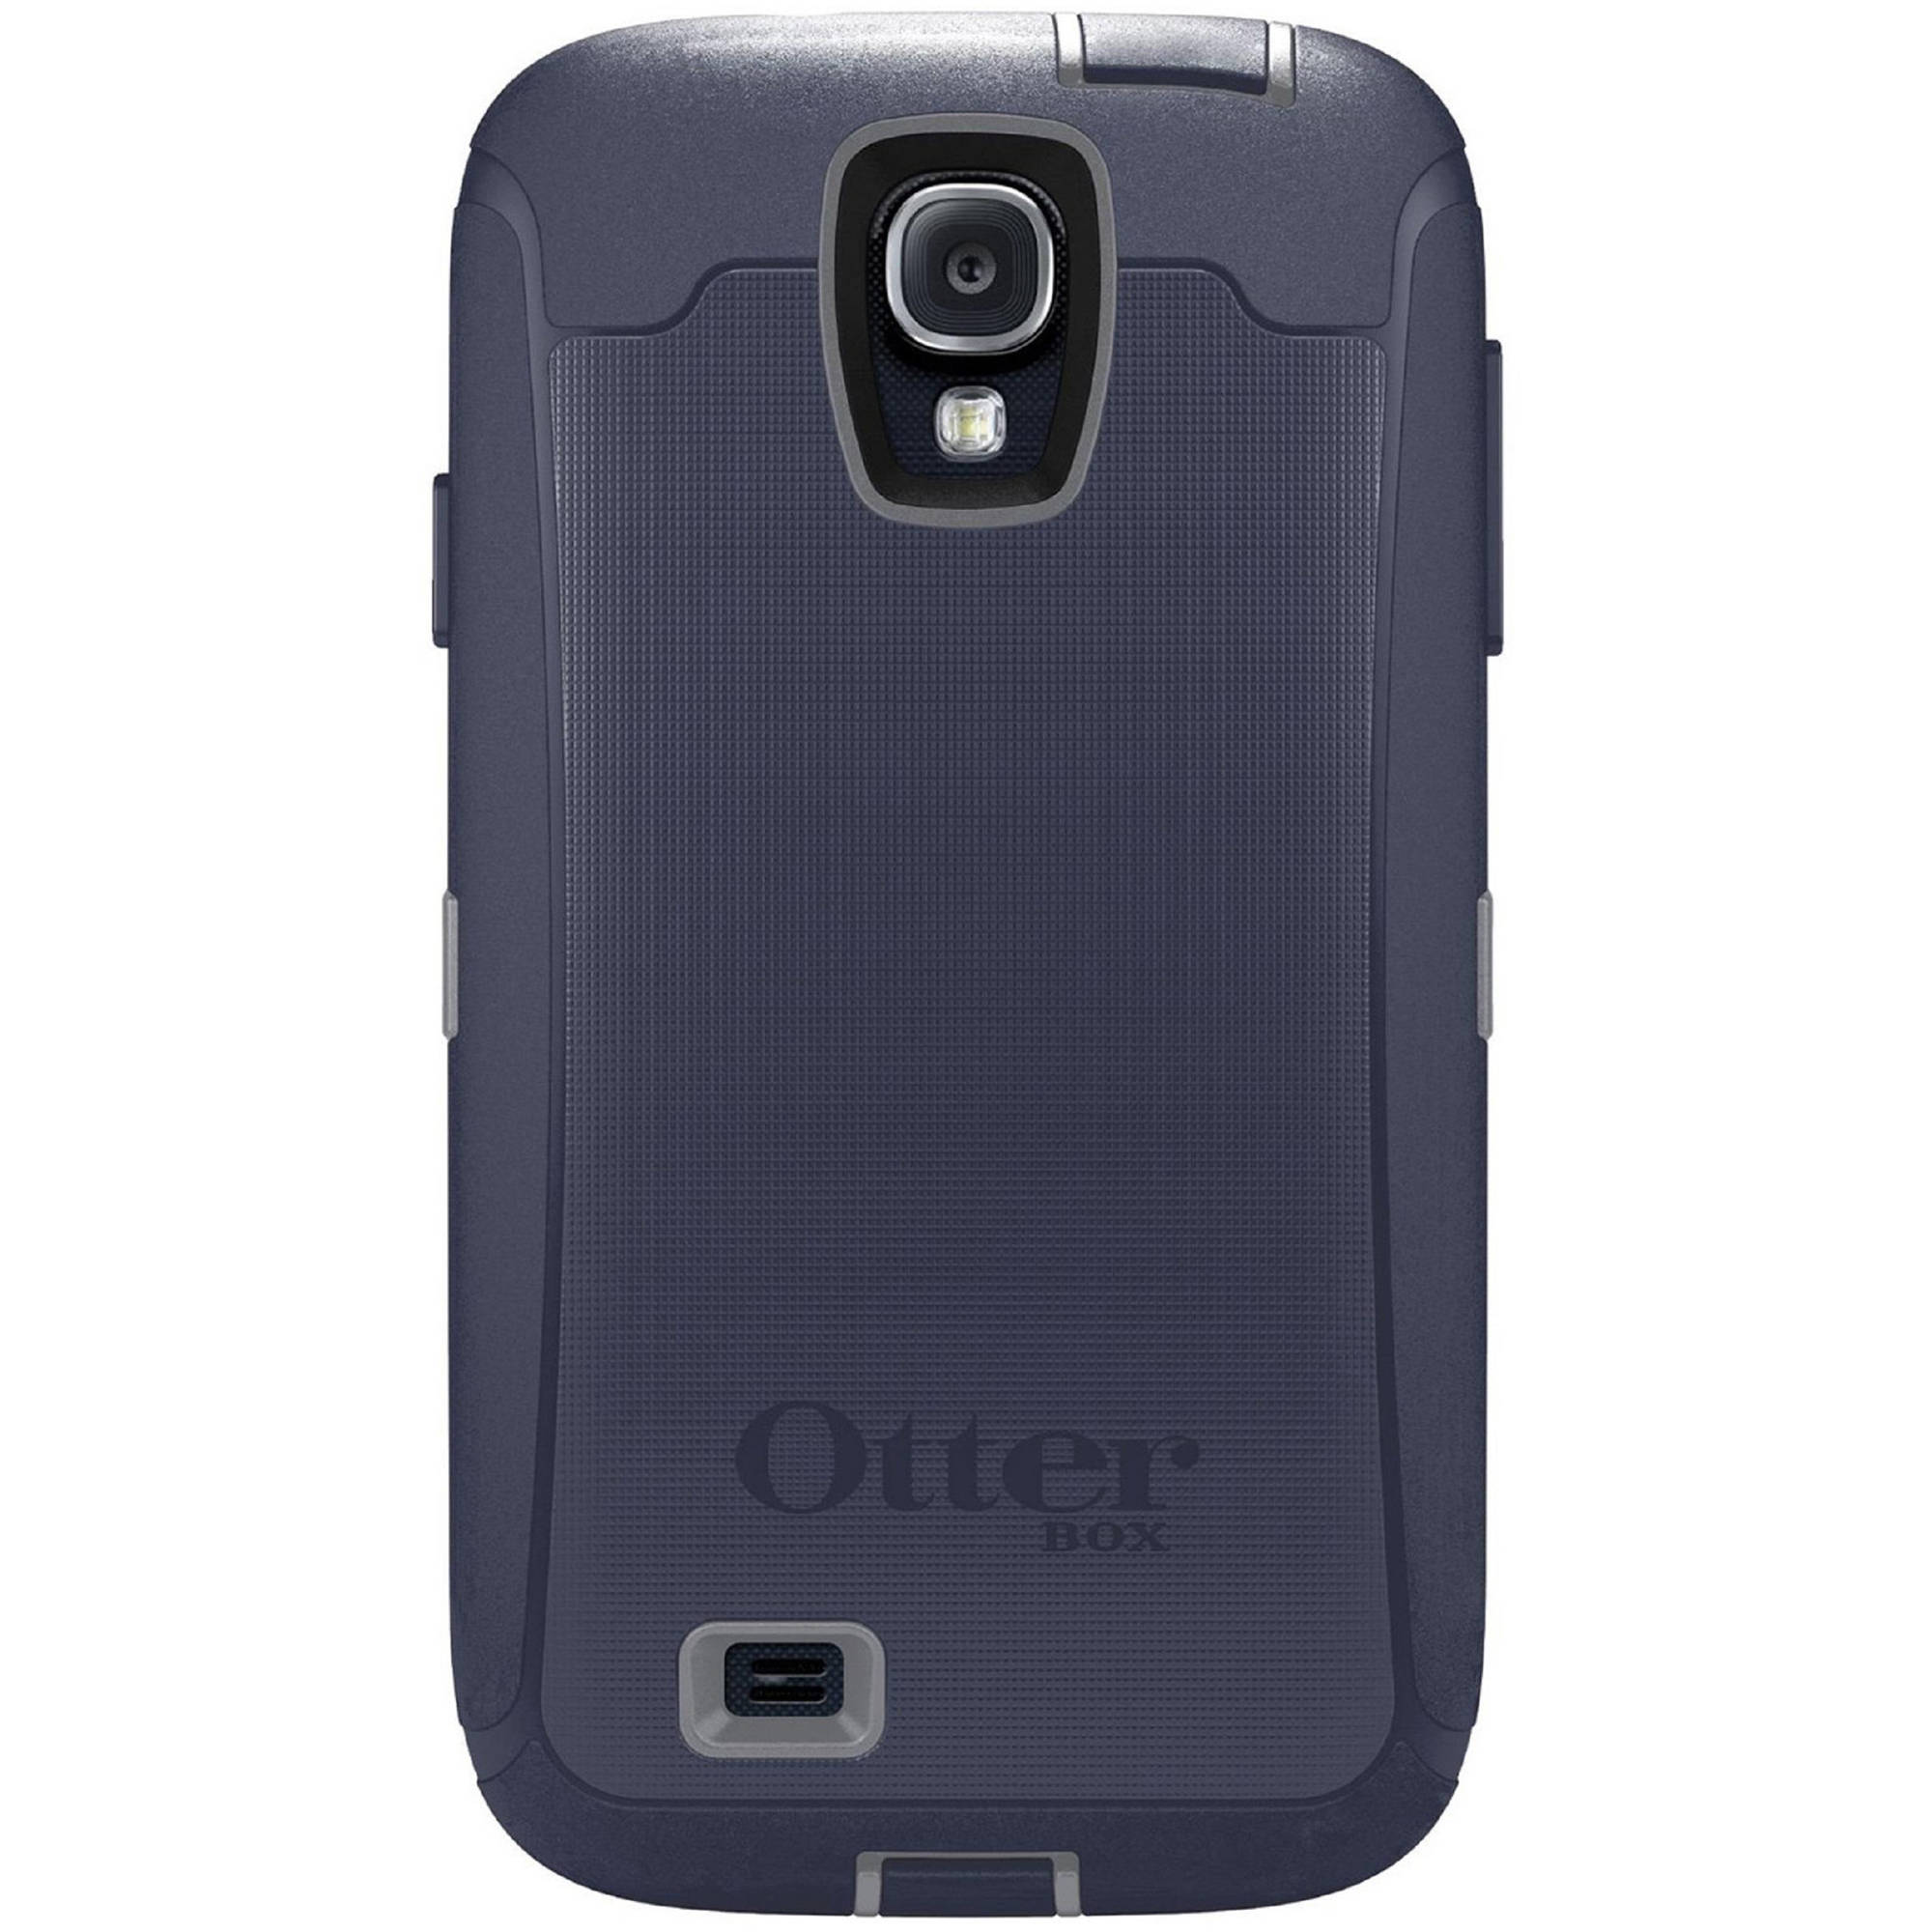 Galaxy S4  Otterbox defender series case - image 1 of 6